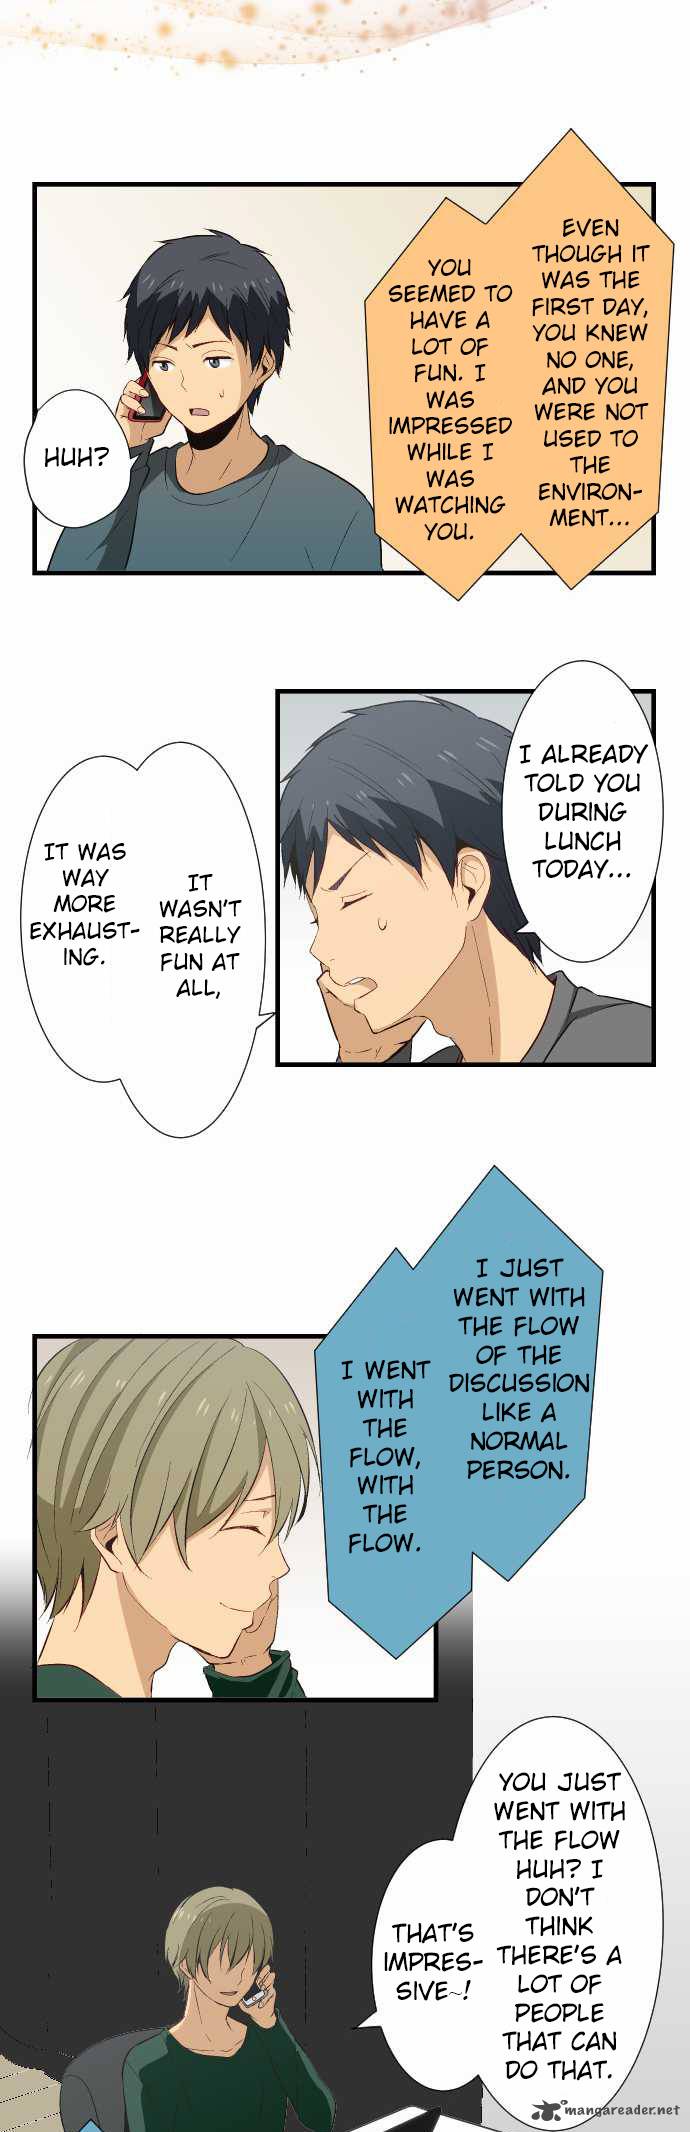 relife_19_12